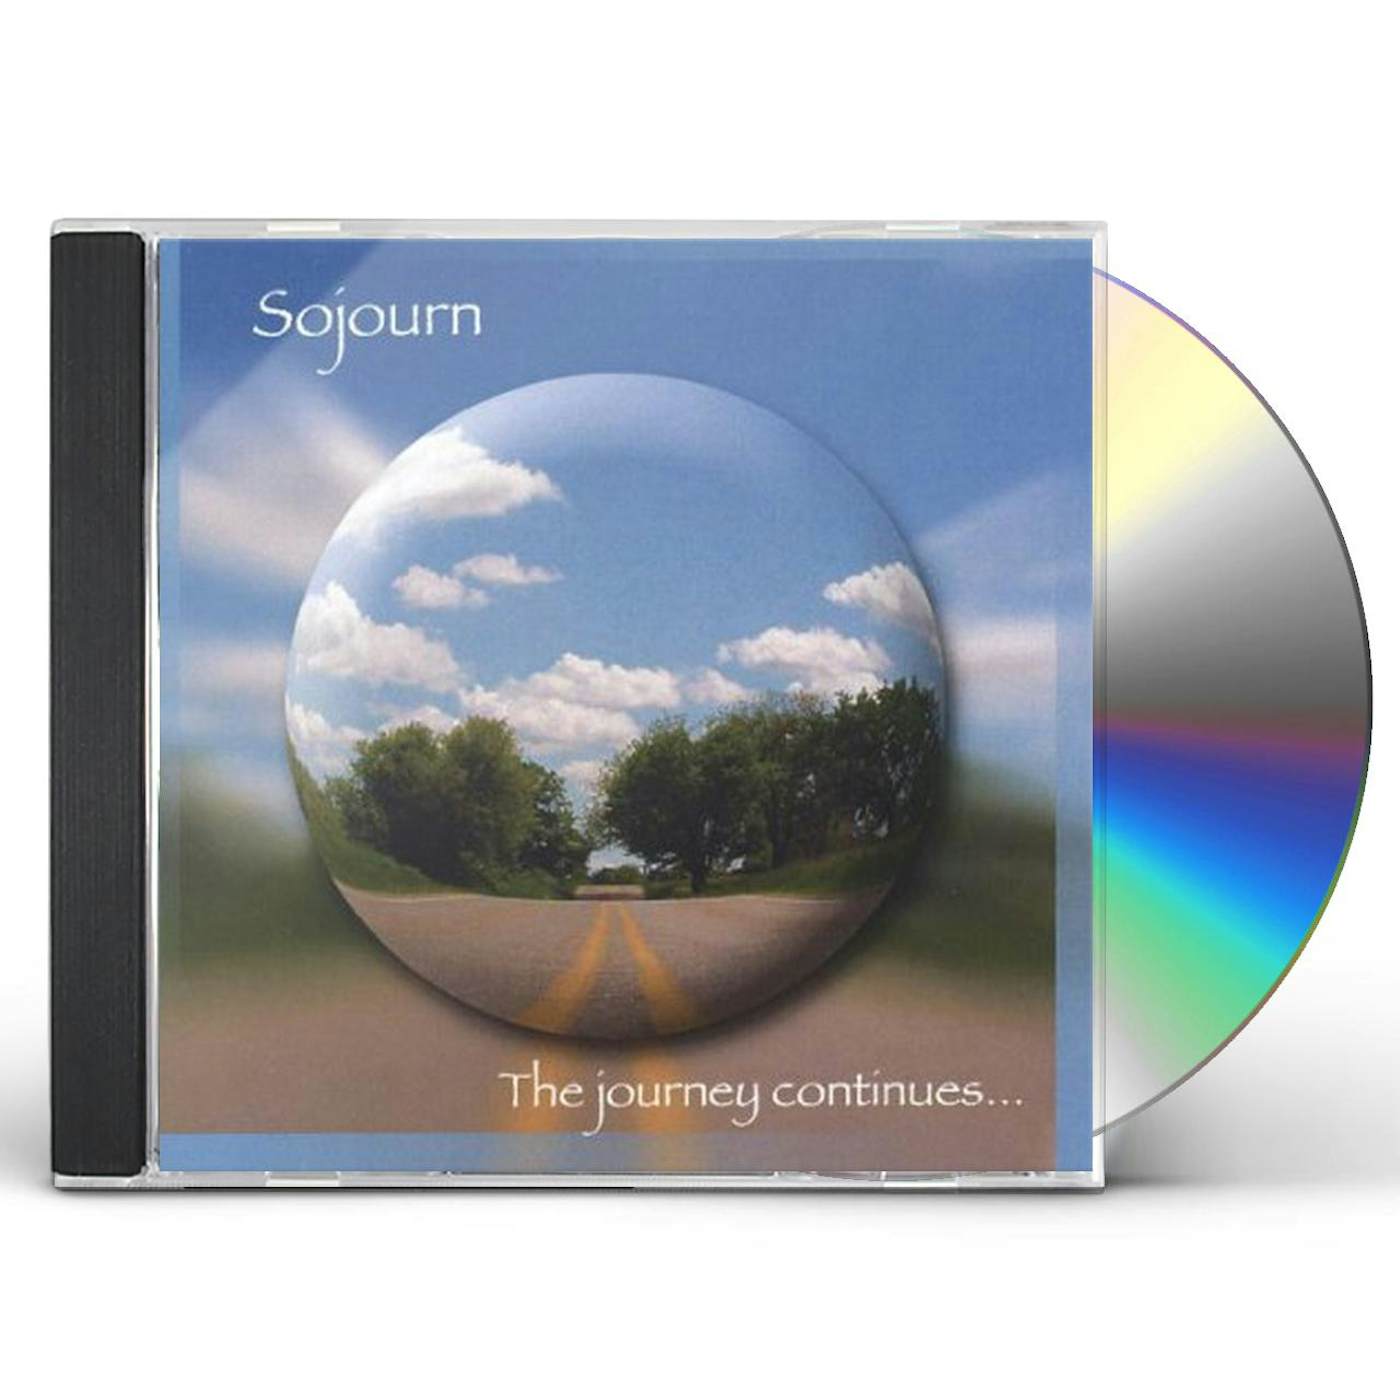 Sojourn JOURNEY CONTINUES CD